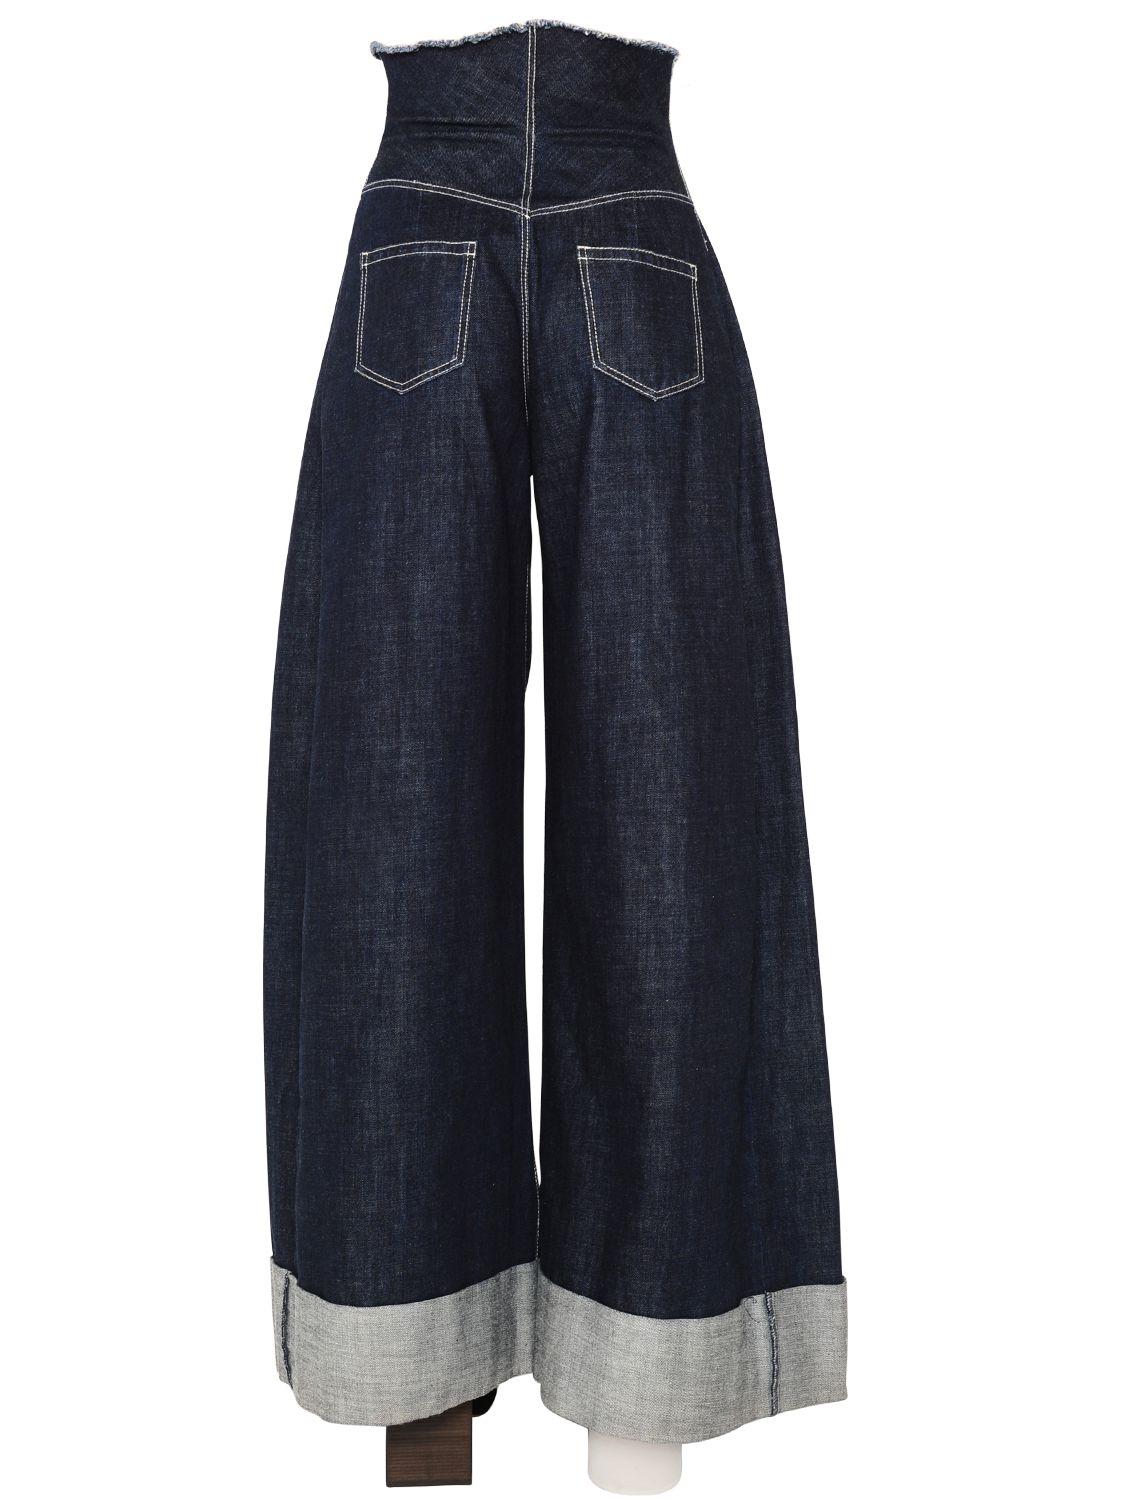 Lyst - Jacquemus High Waisted Wide Leg Denim Jeans in Blue